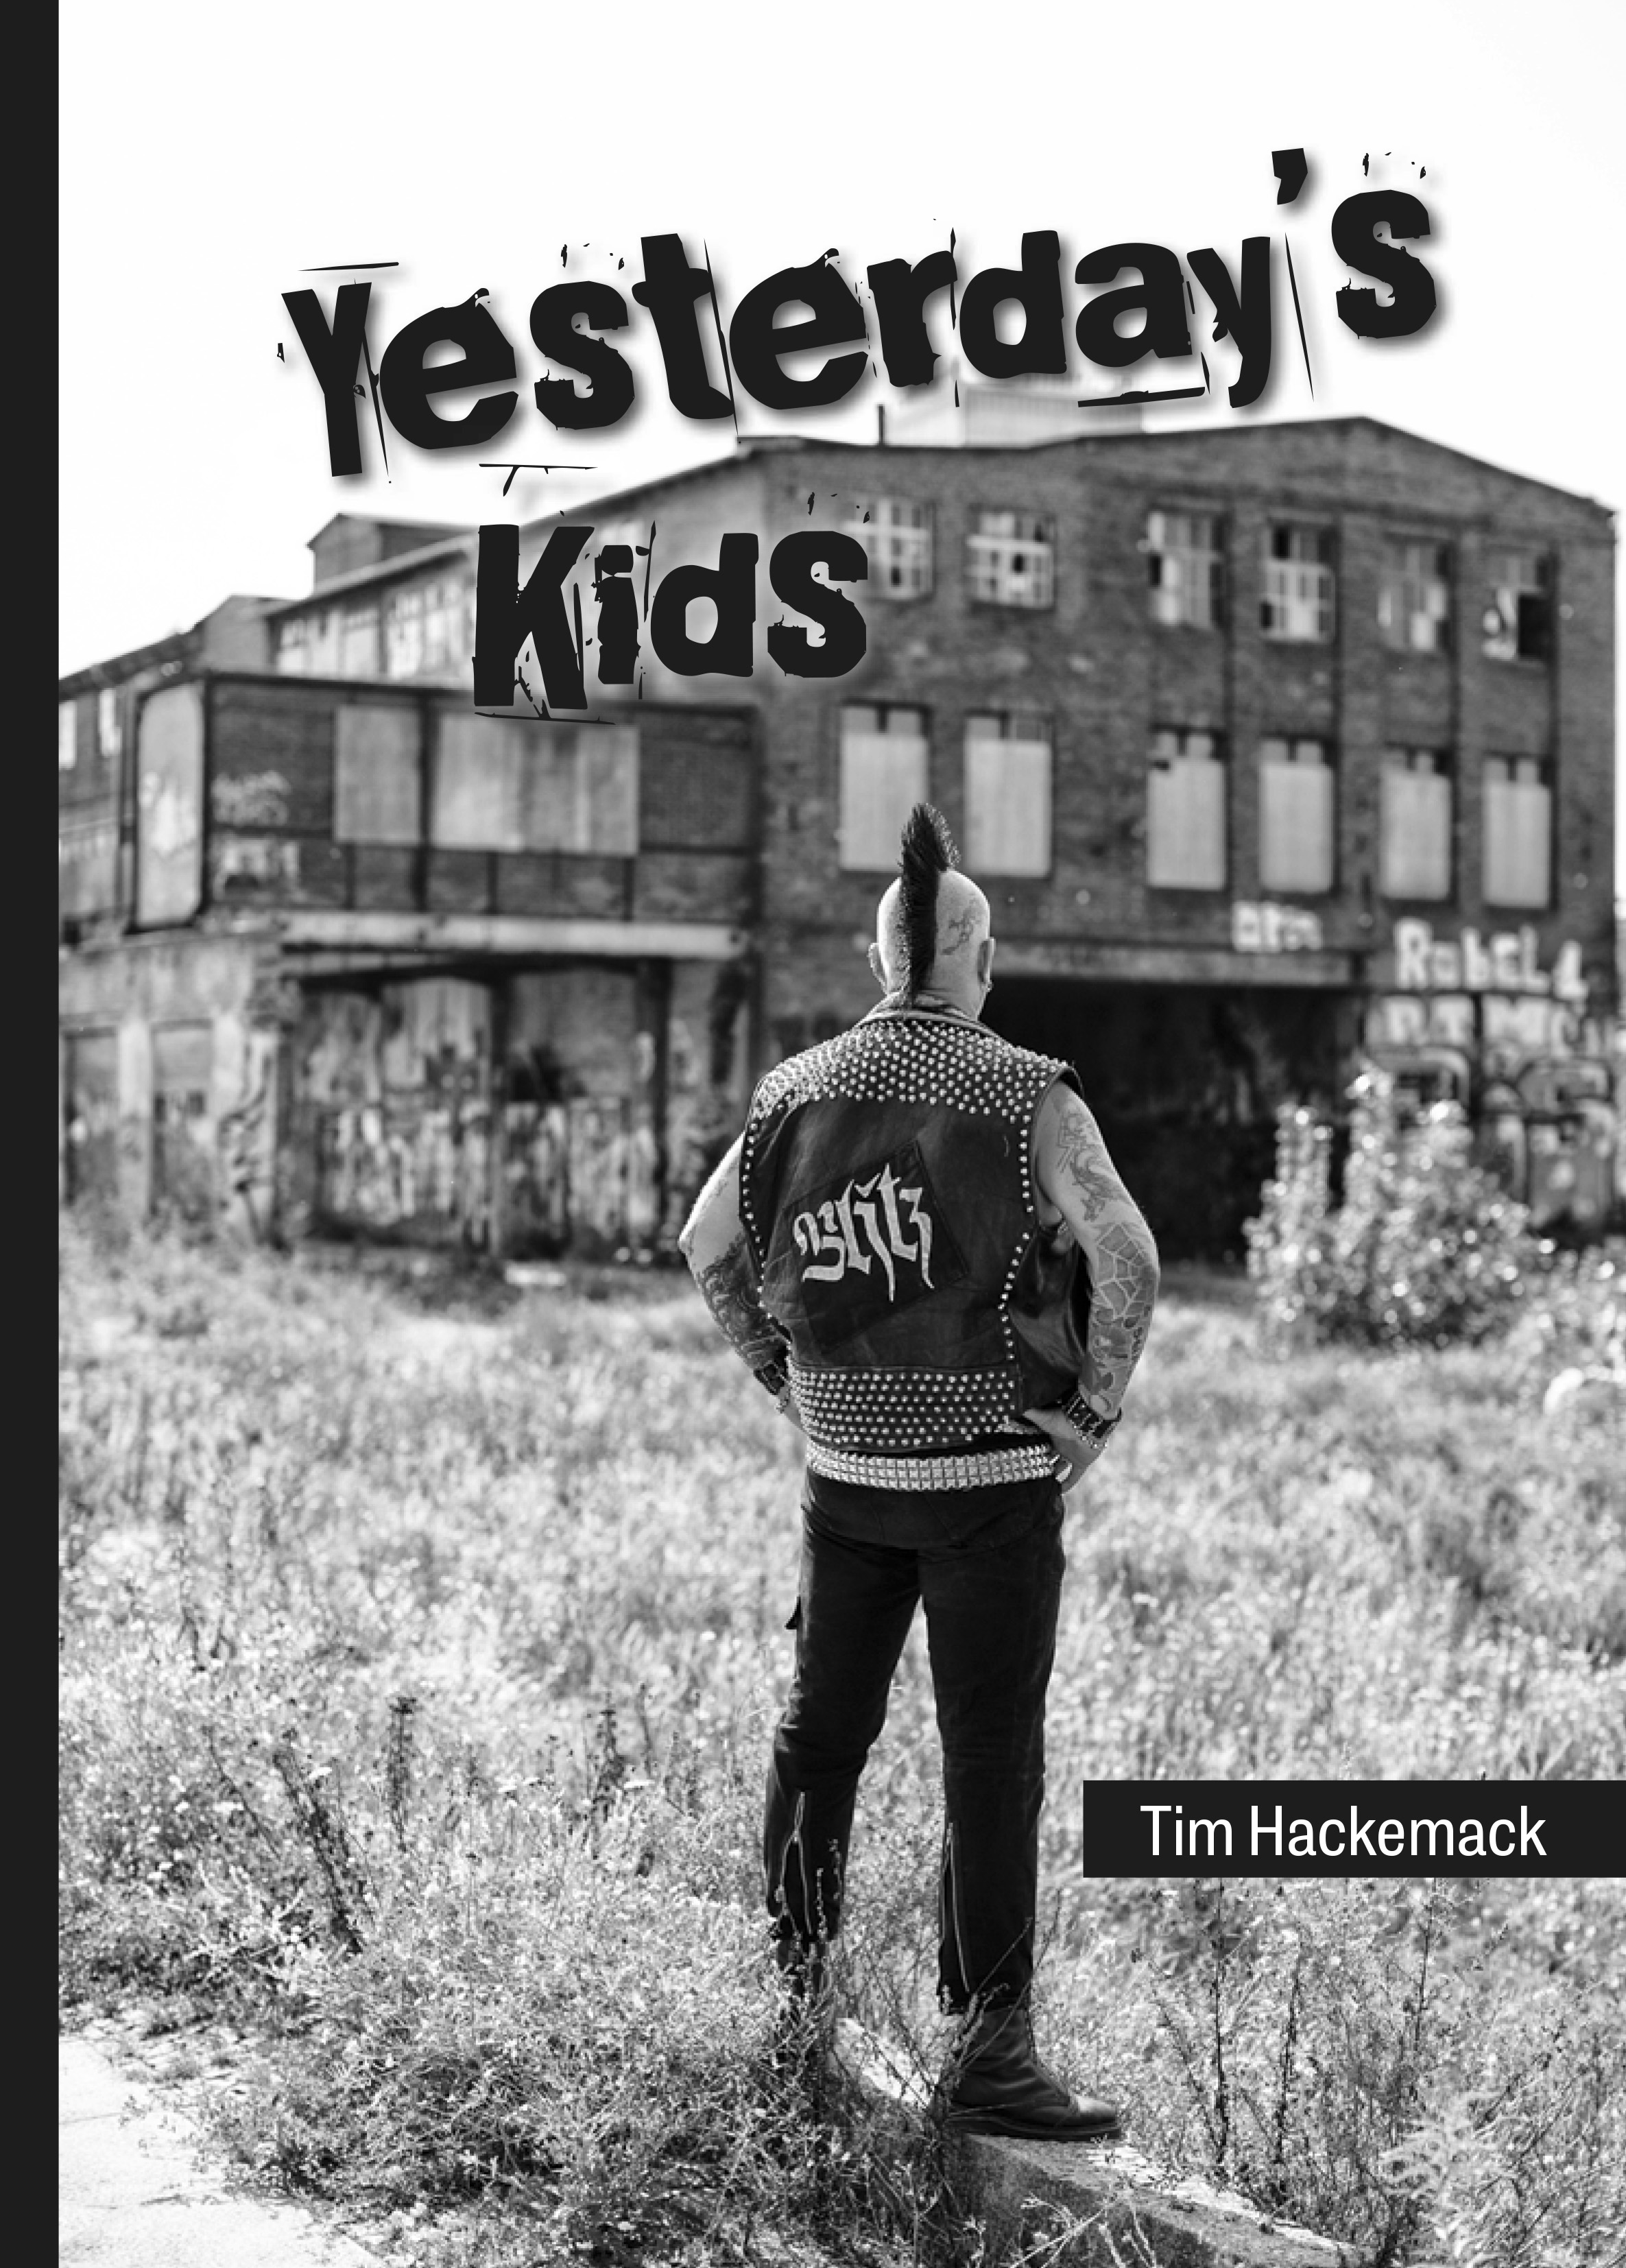 You are currently viewing TIM HACKEMACK – Yesterday’s kids